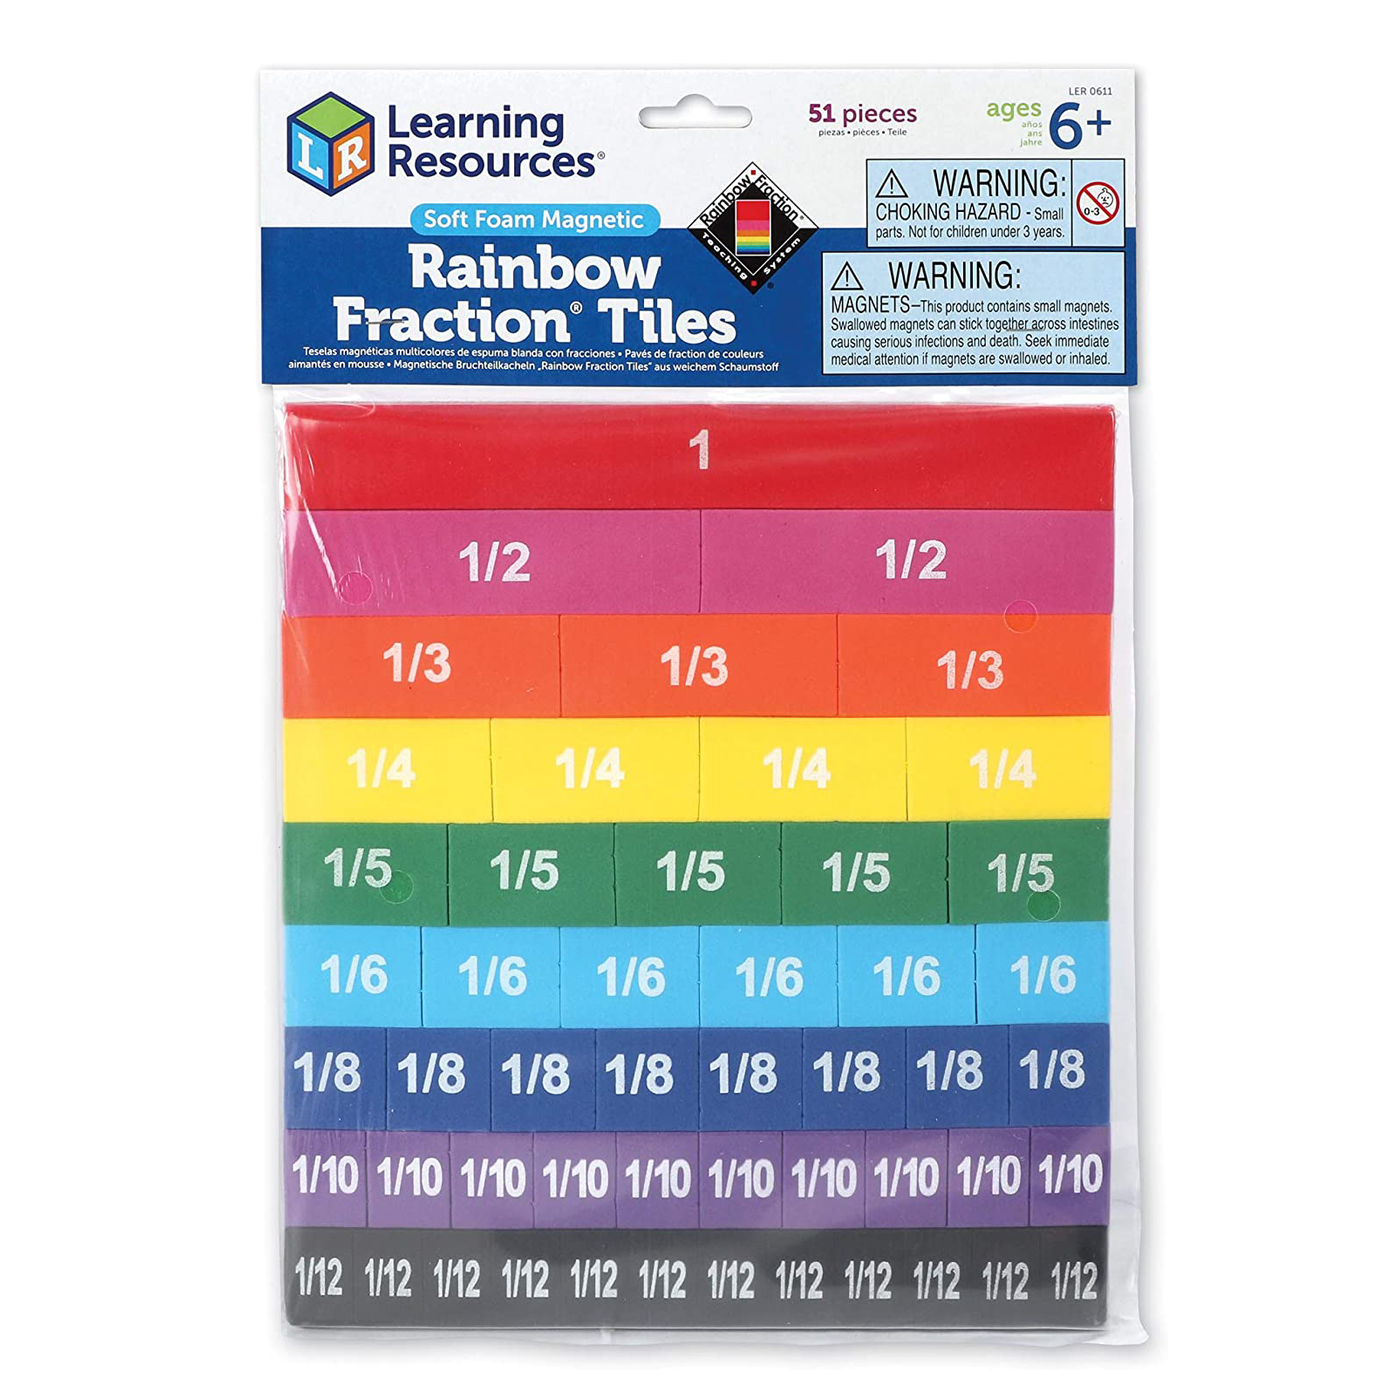 LCBF Rainbow Fraction Tiles 51 Pieces Assorted Ages 6+